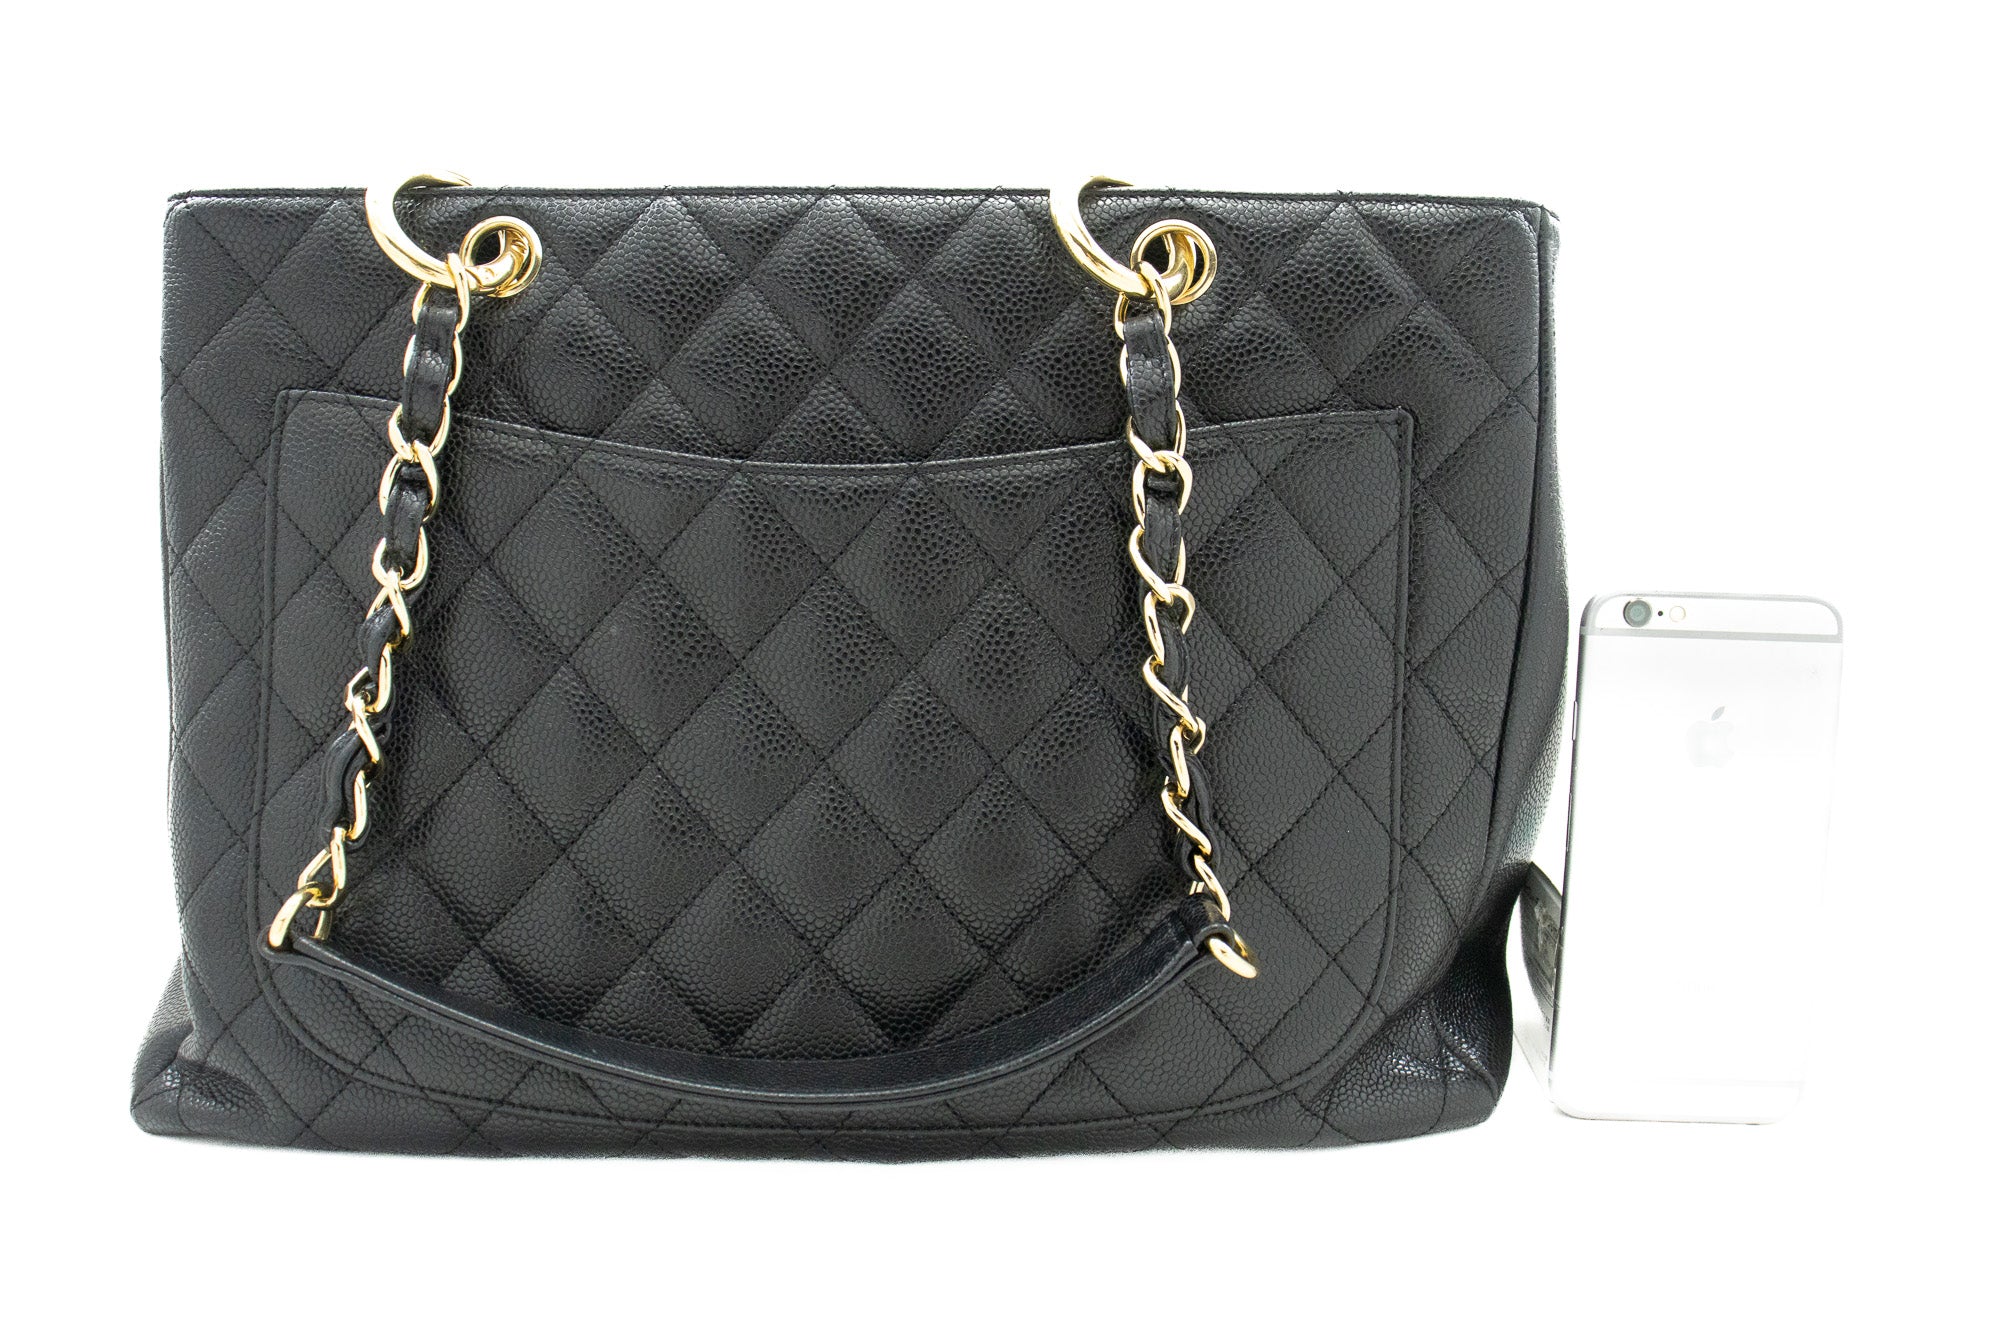 CHANEL BAG Grand Shopping Black Quilted Leather Shoulder -  Norway